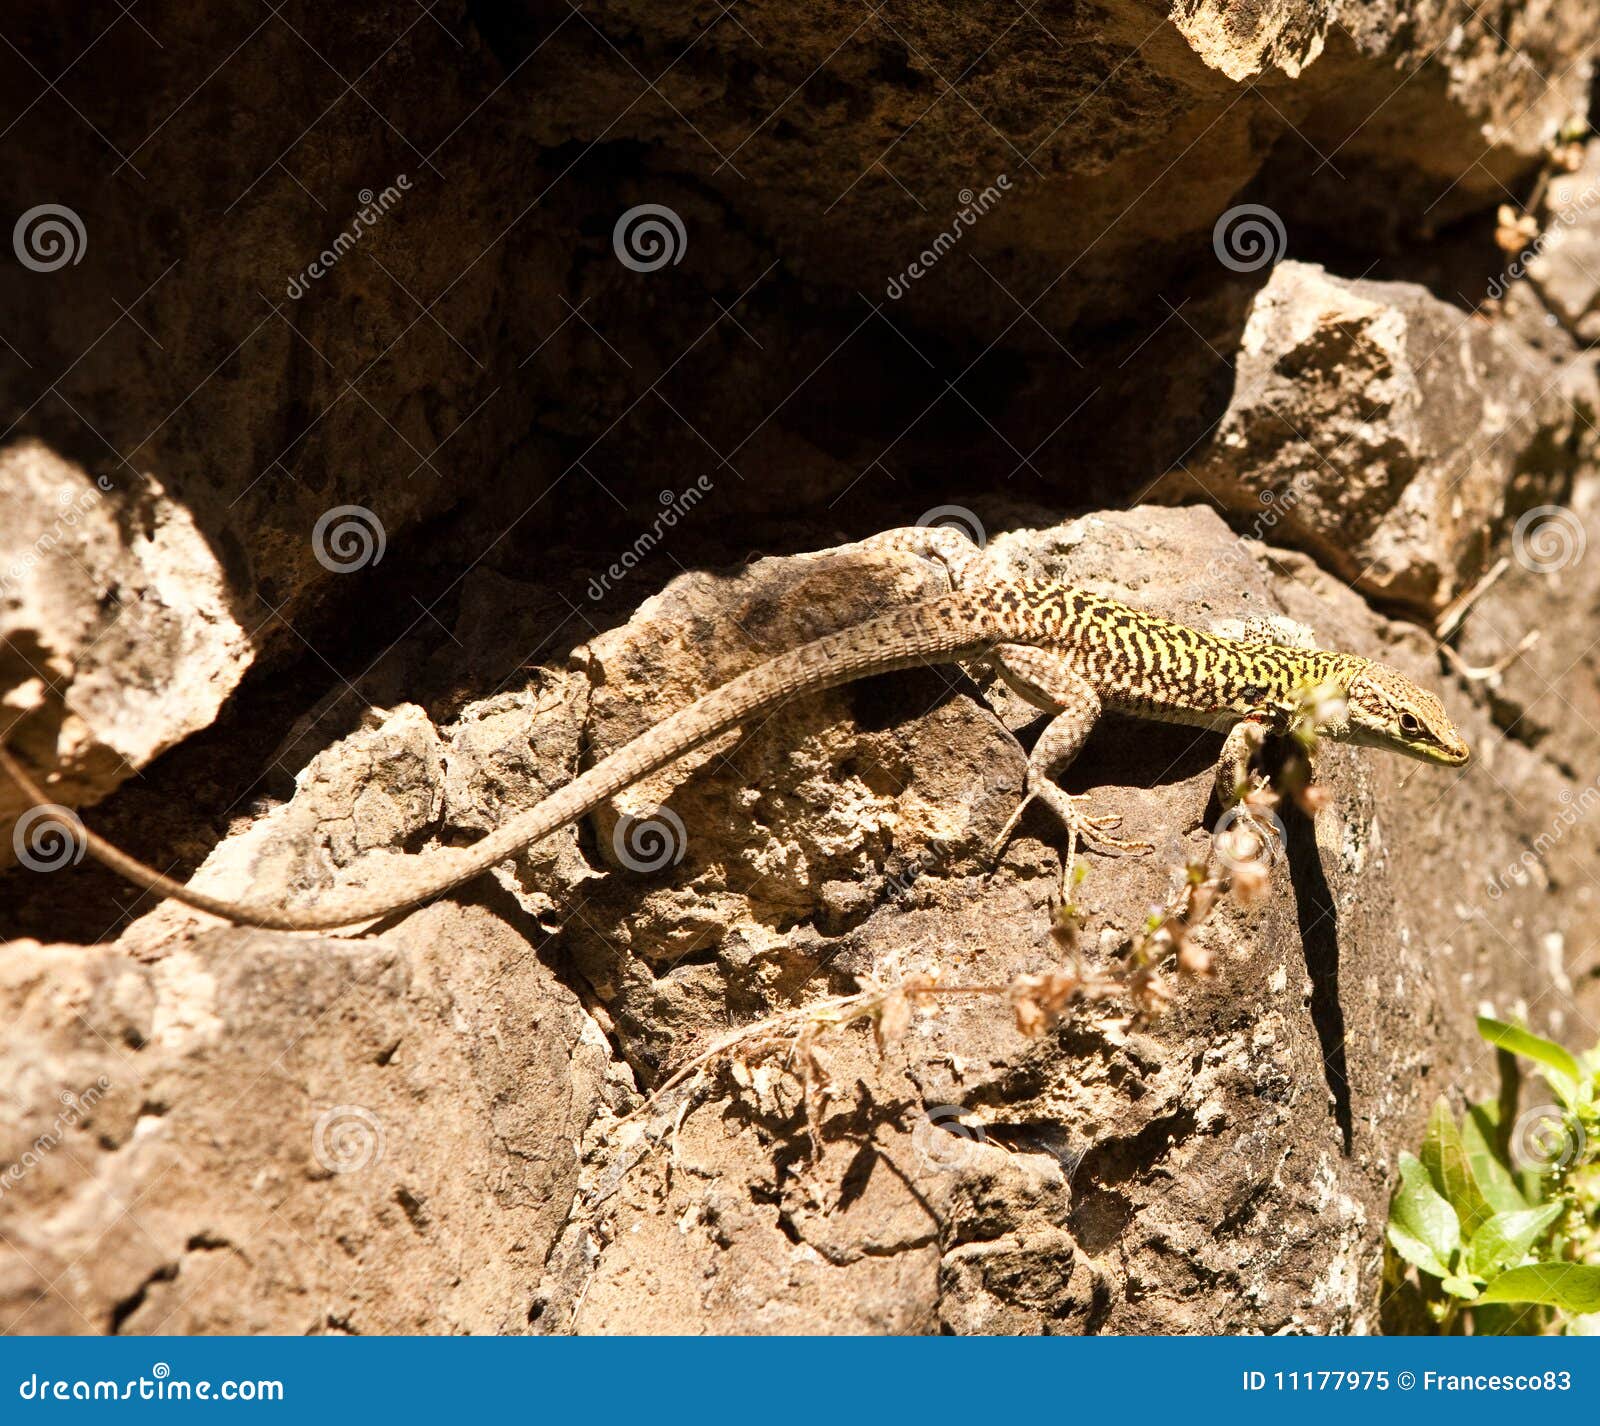 Lizard stock image. Image of cold, chameleon, effect ...